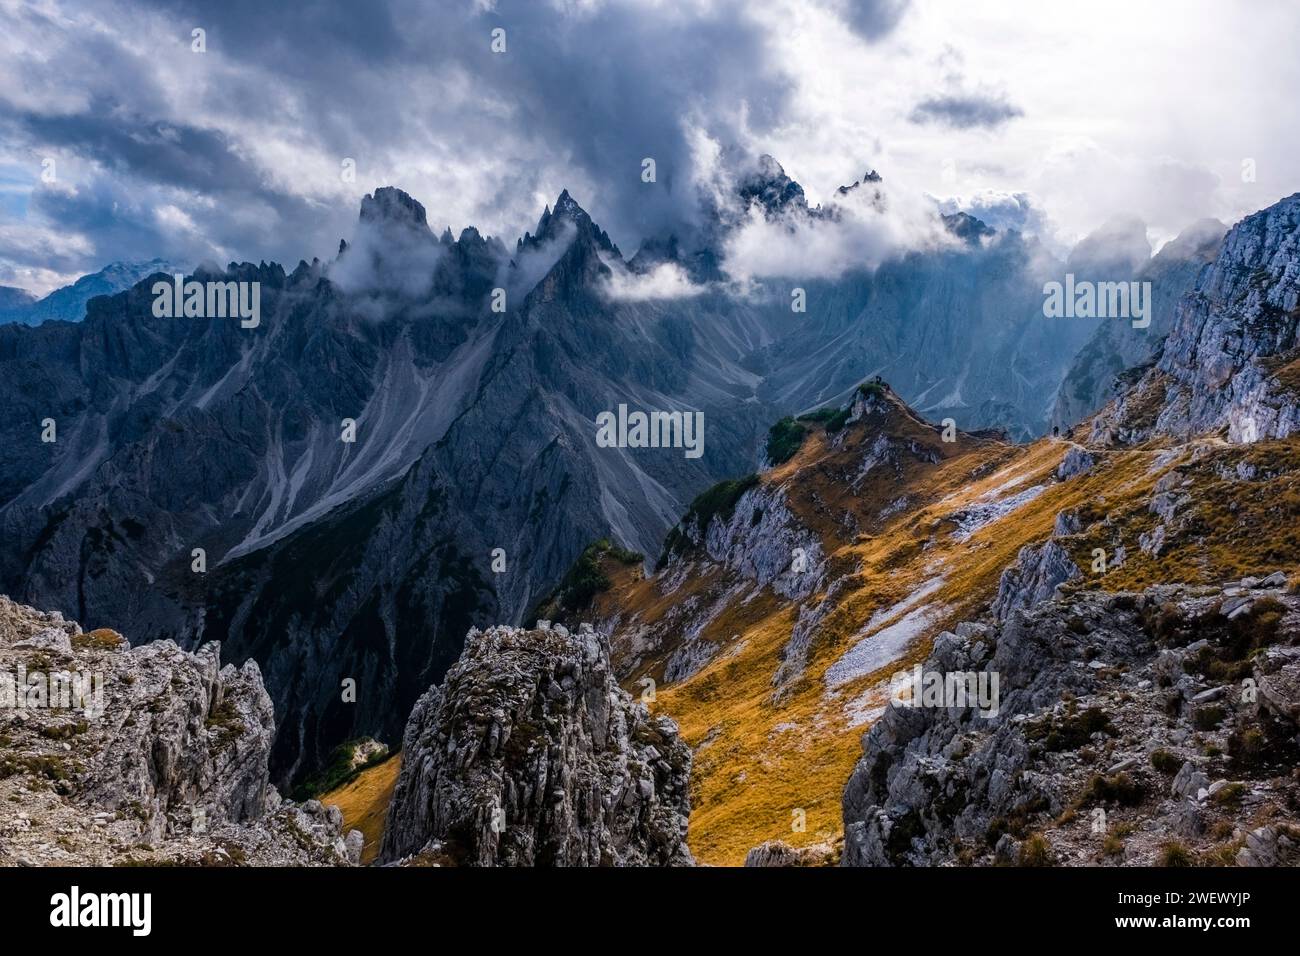 The rocky summits of the rock formation Cadini di Misurina in Tre Cime National Park, partially shrouded in clouds, in autumn. Stock Photo